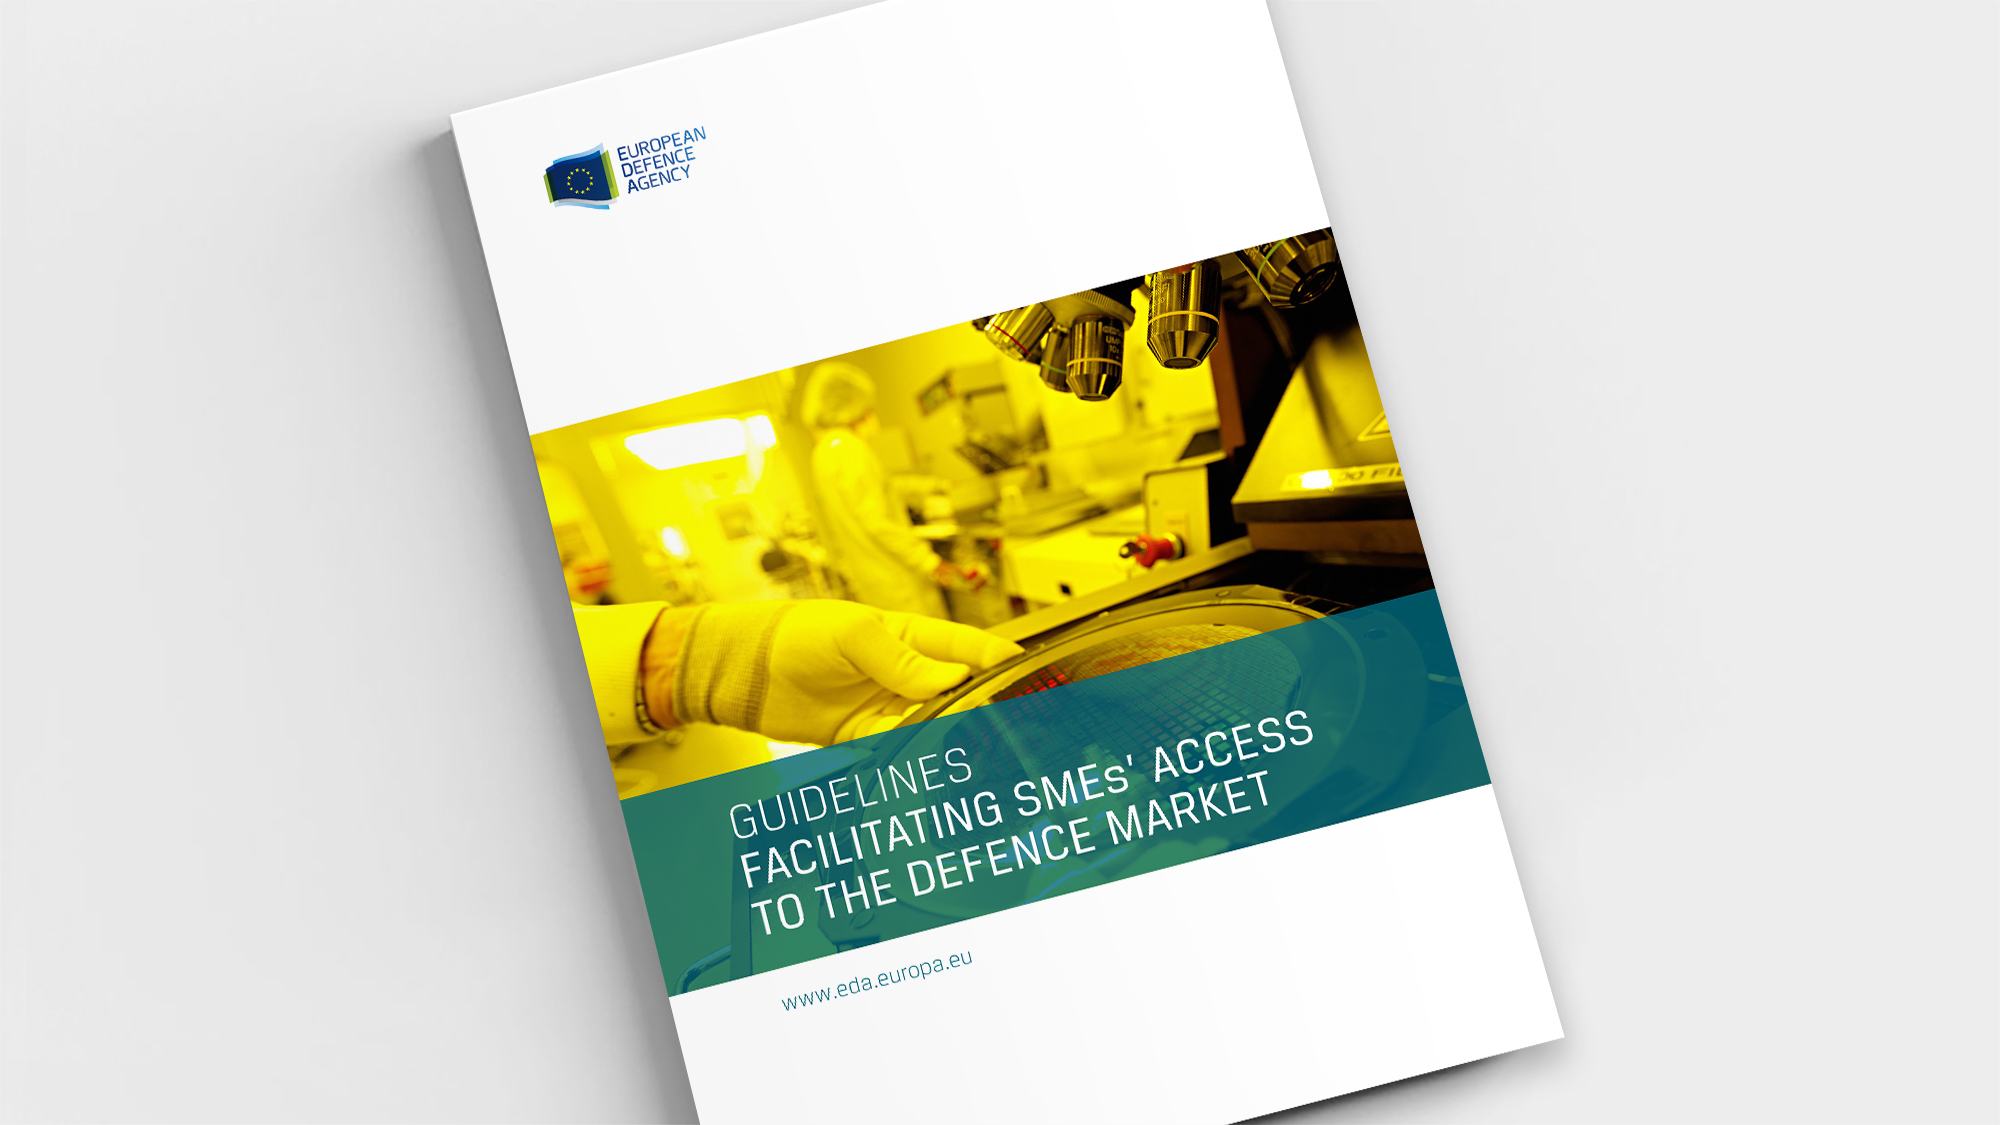 Guidelines- Facilitating SMEs’ access